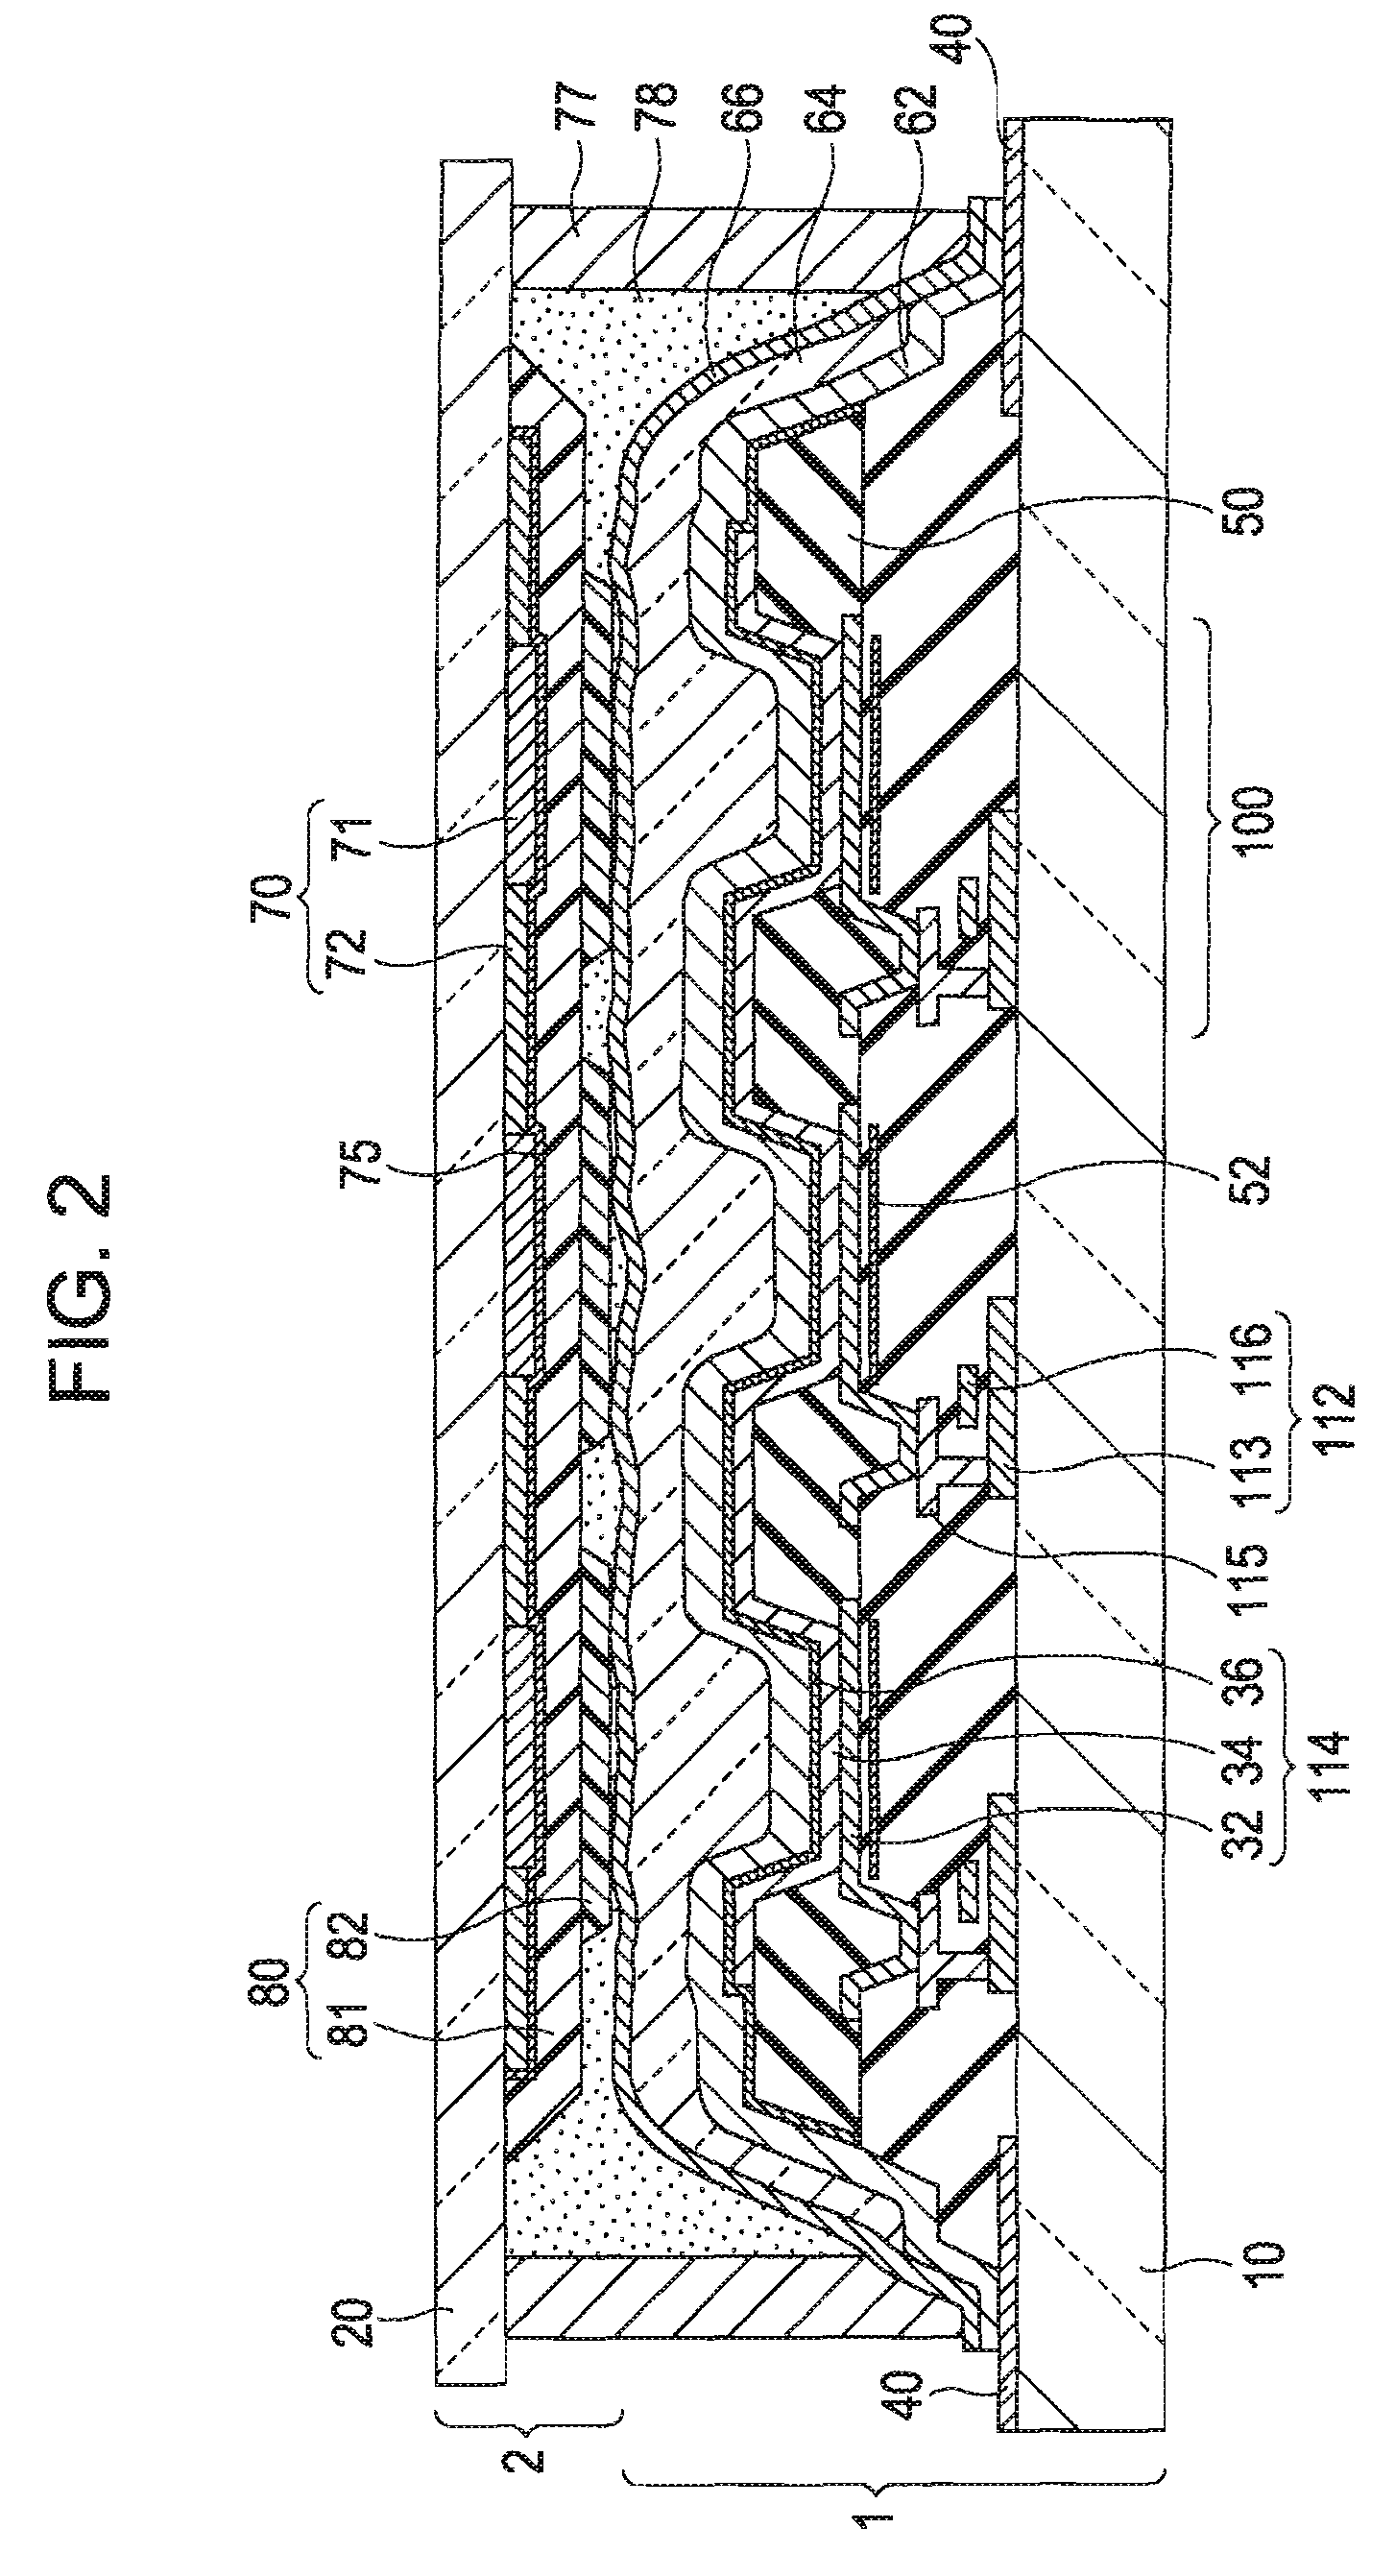 Electro-luminescence device and method of manufacturing electro-luminescence device